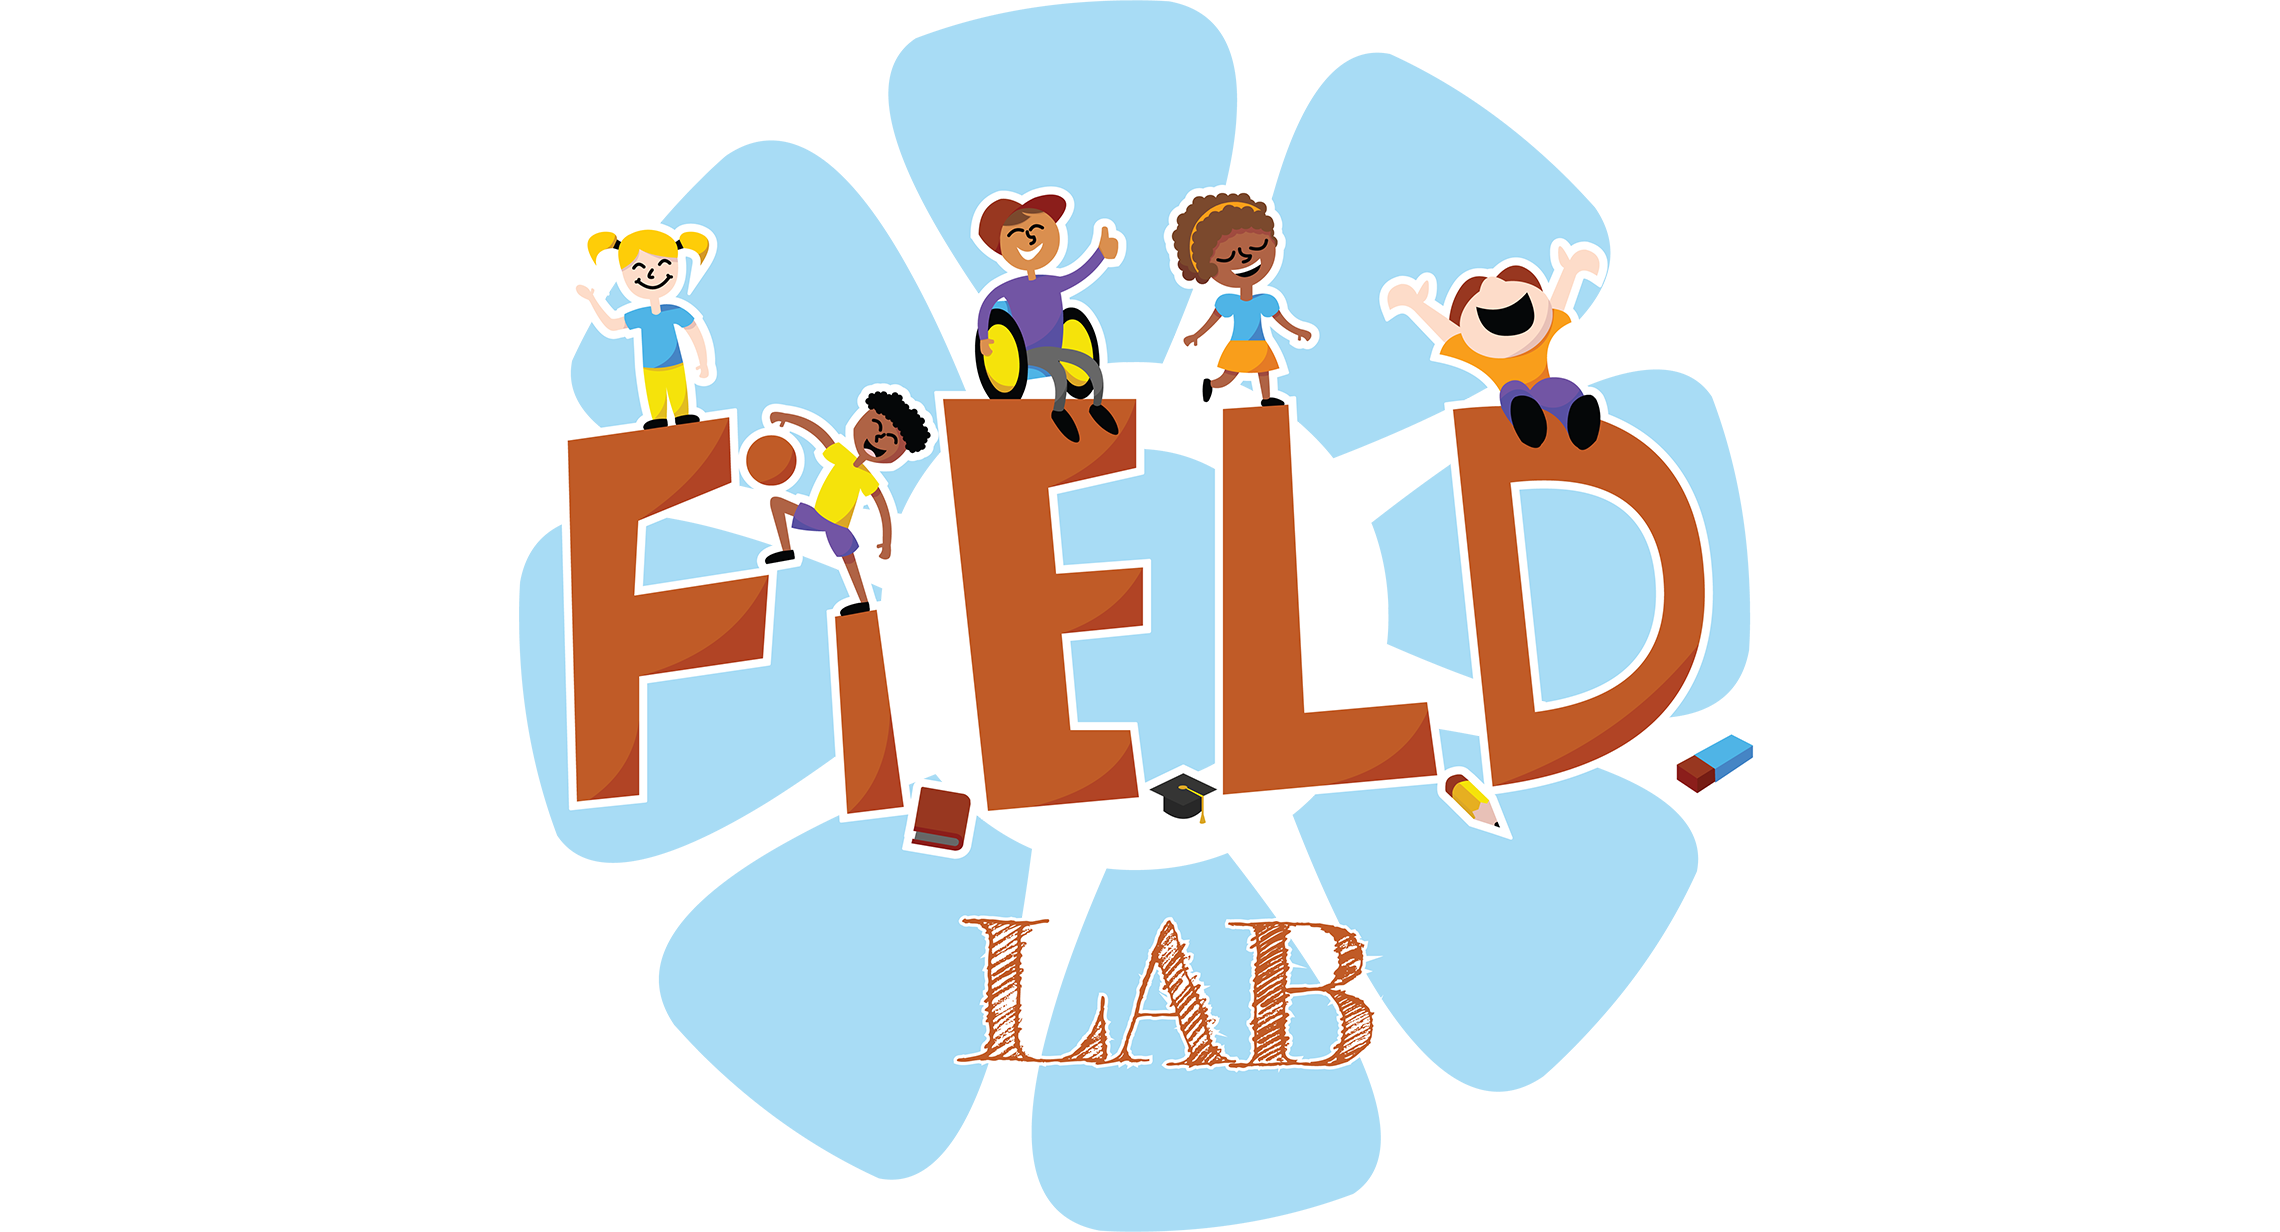 Field lab logo with image of diverse children playing on top of the letters and a blue flower in the background.